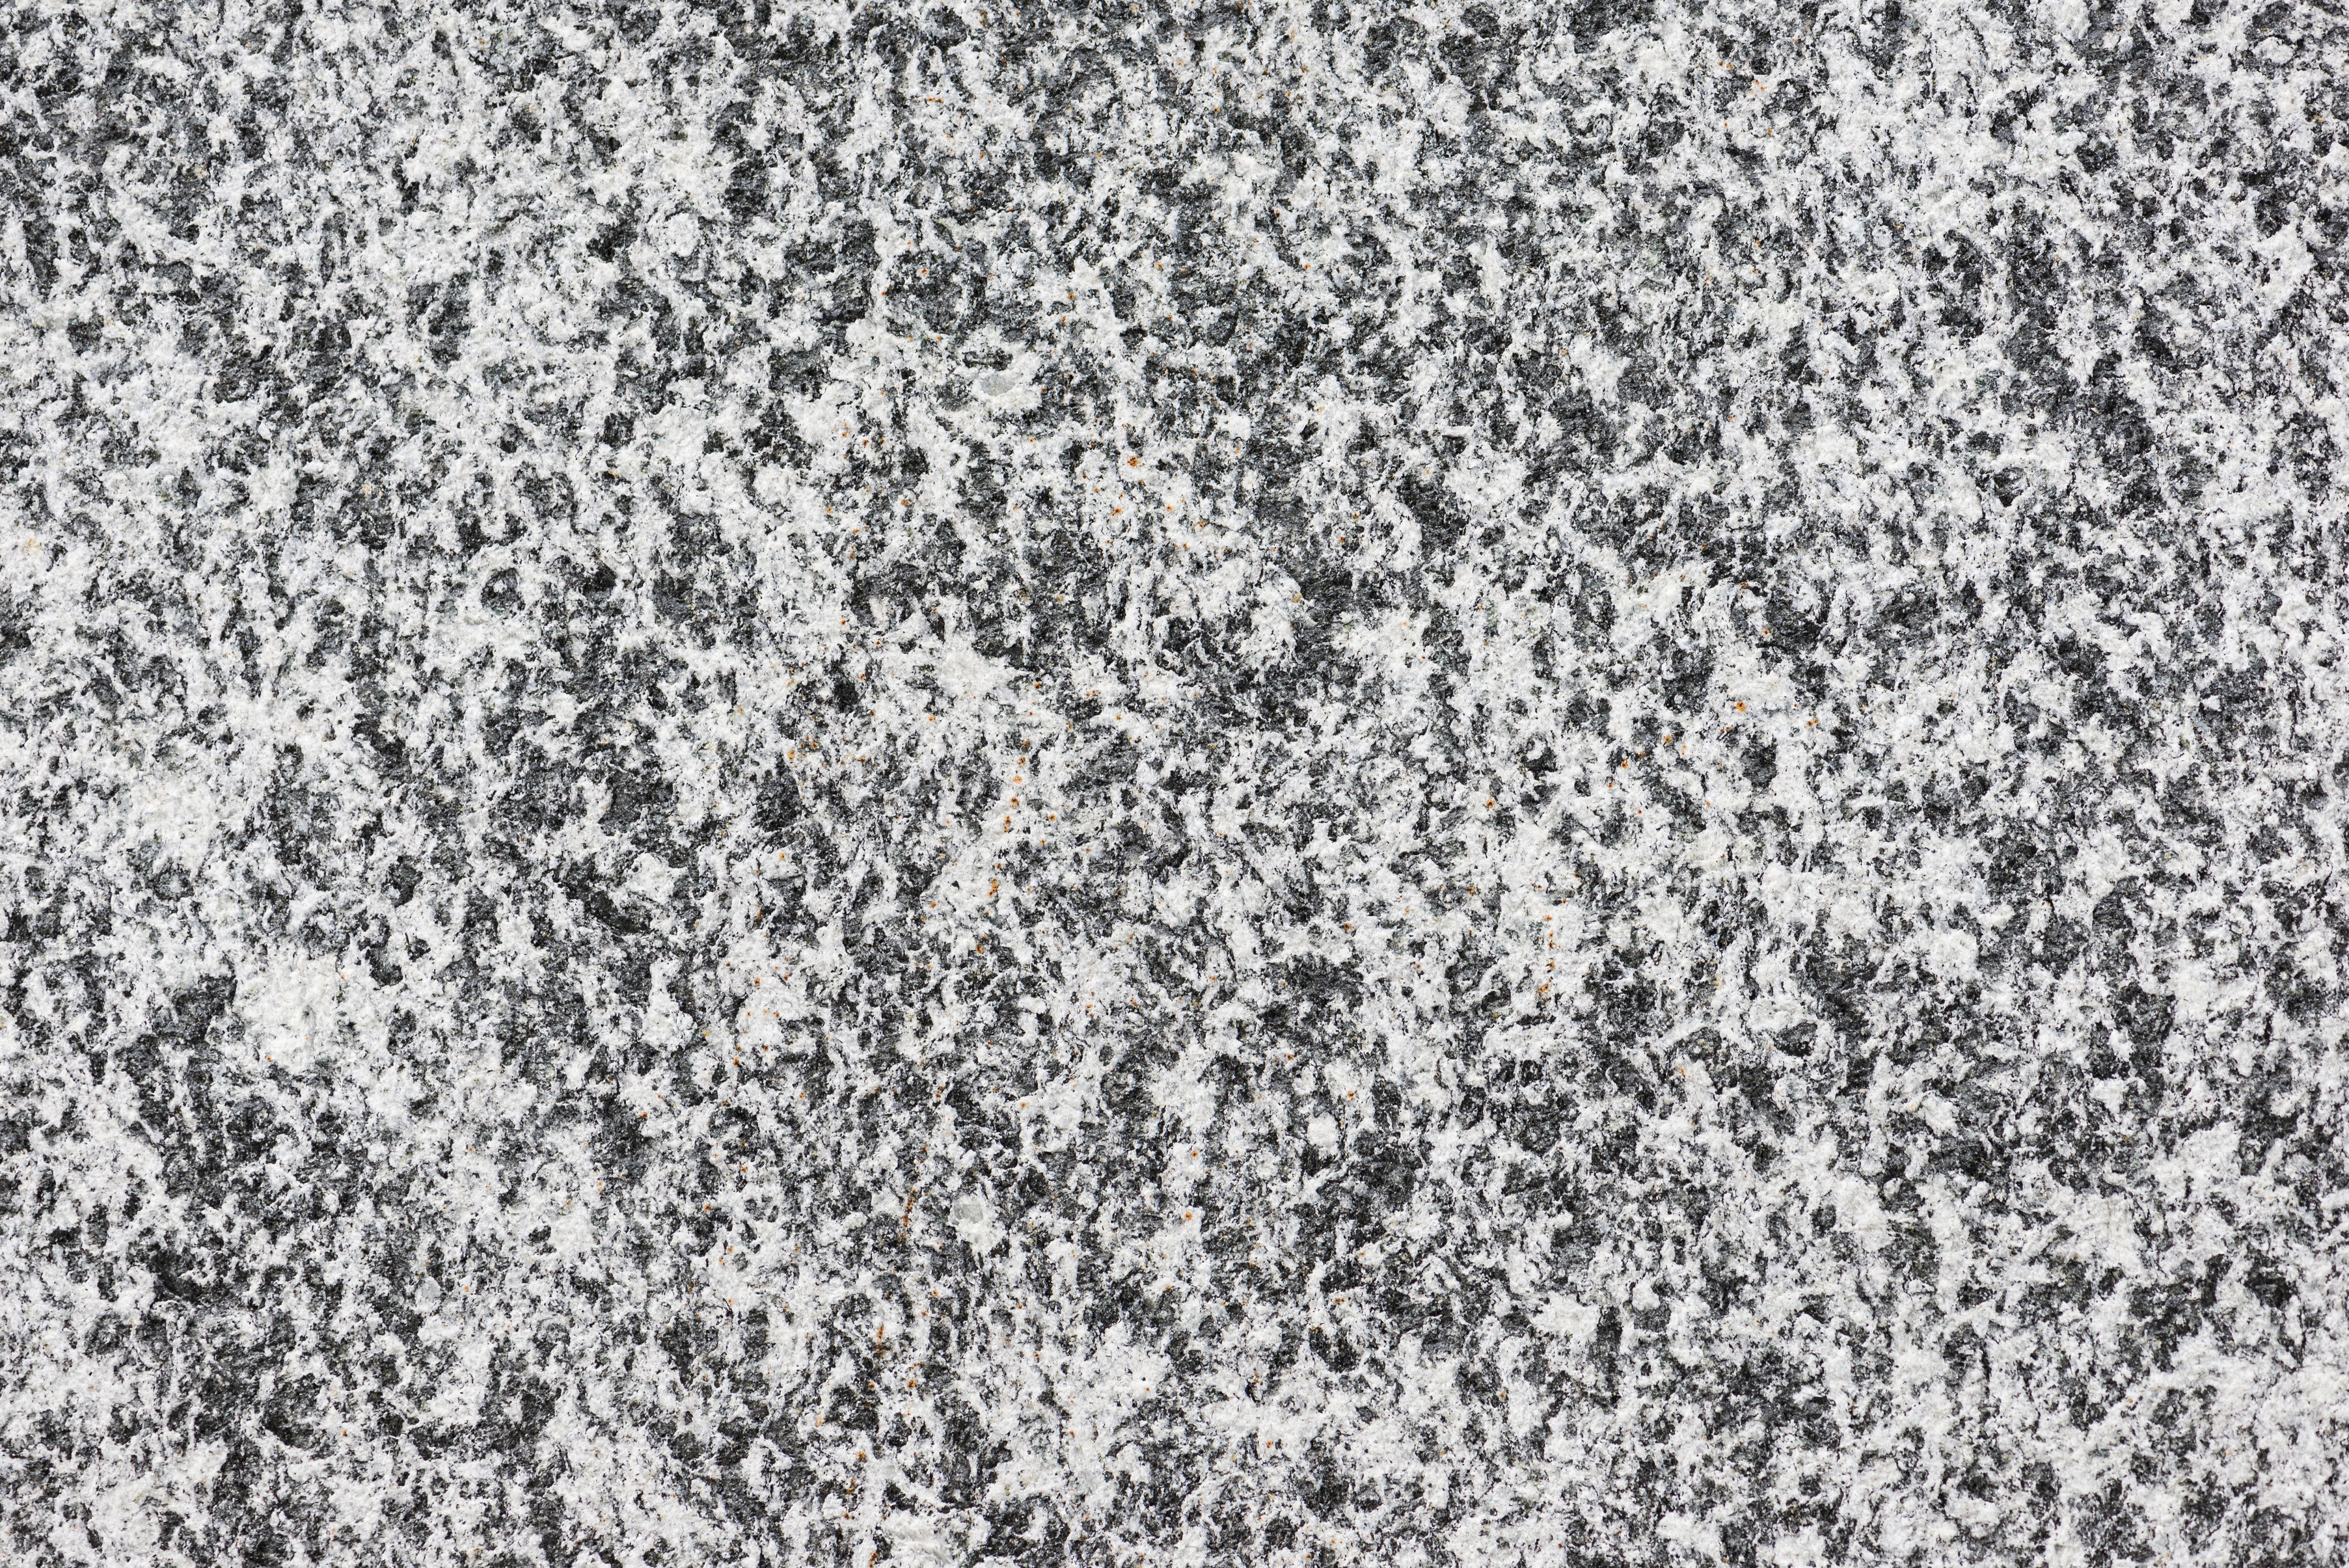 Speckled Black and White Rock Abstract Background Texture